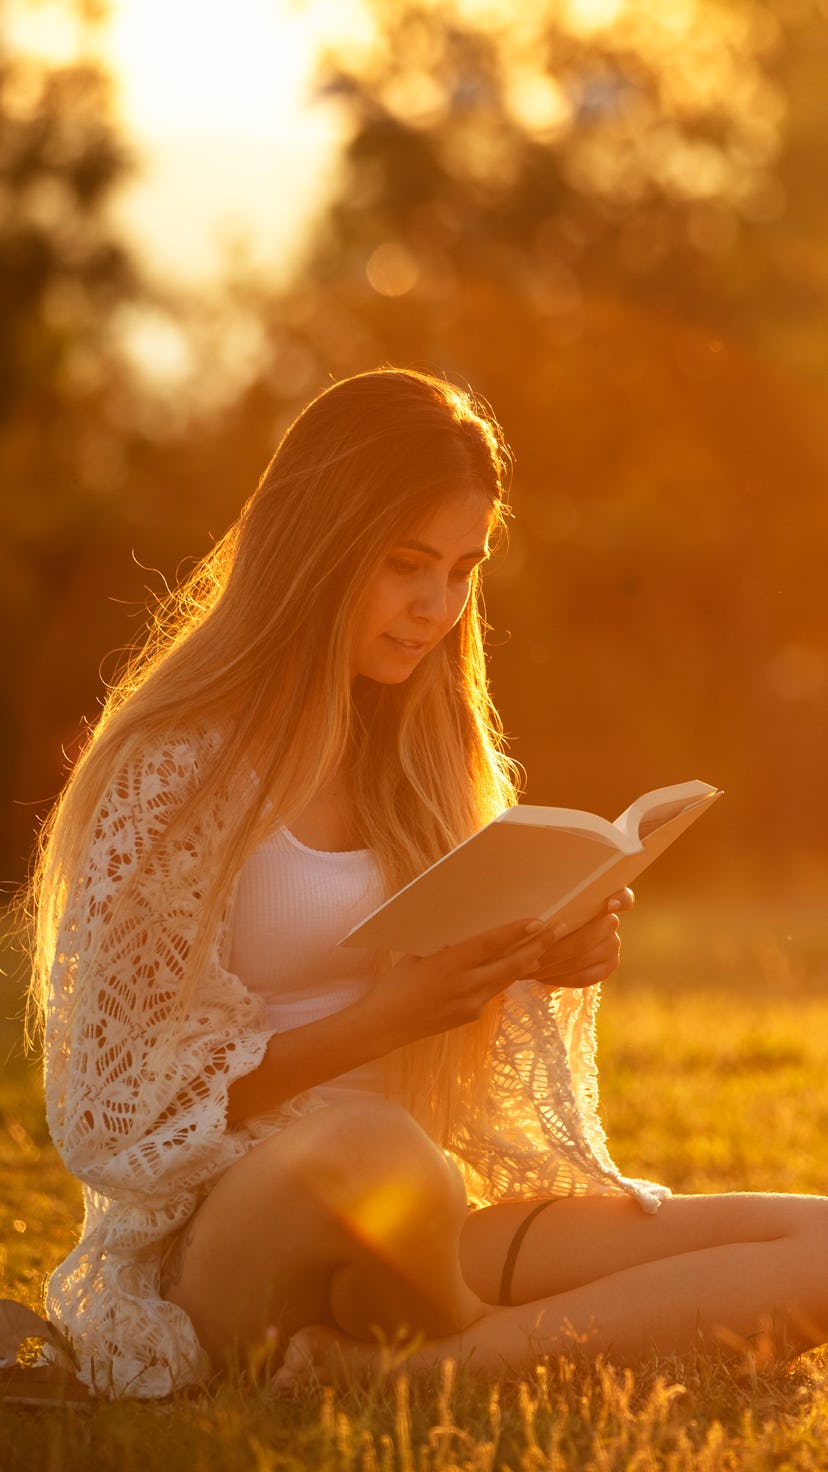 young woman studying on the grass at sunset